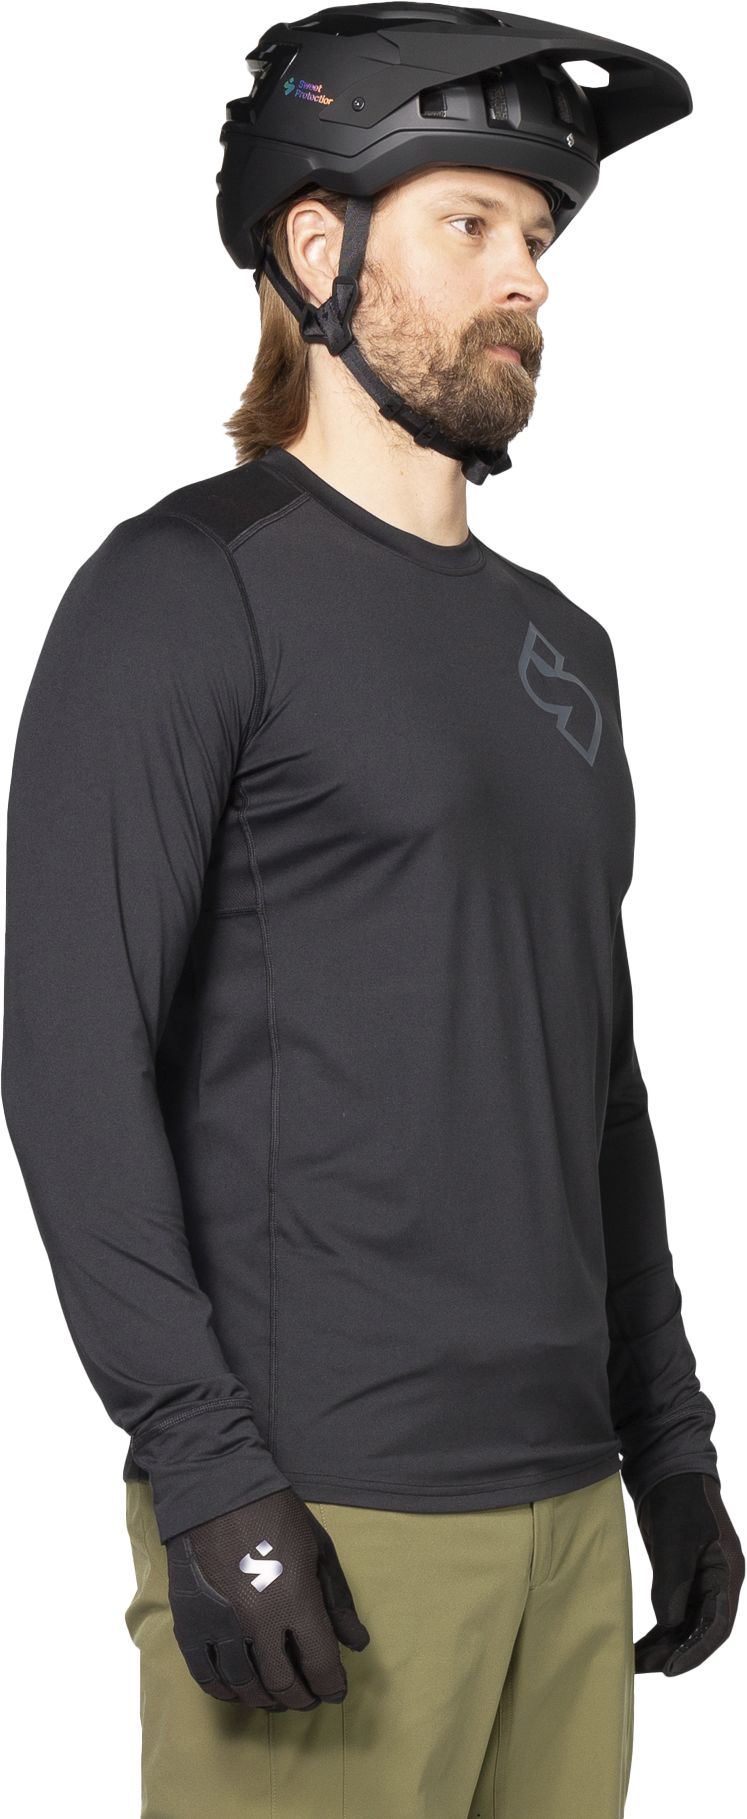 SWEET PROTECTION, M HUNTER LS JERSEY